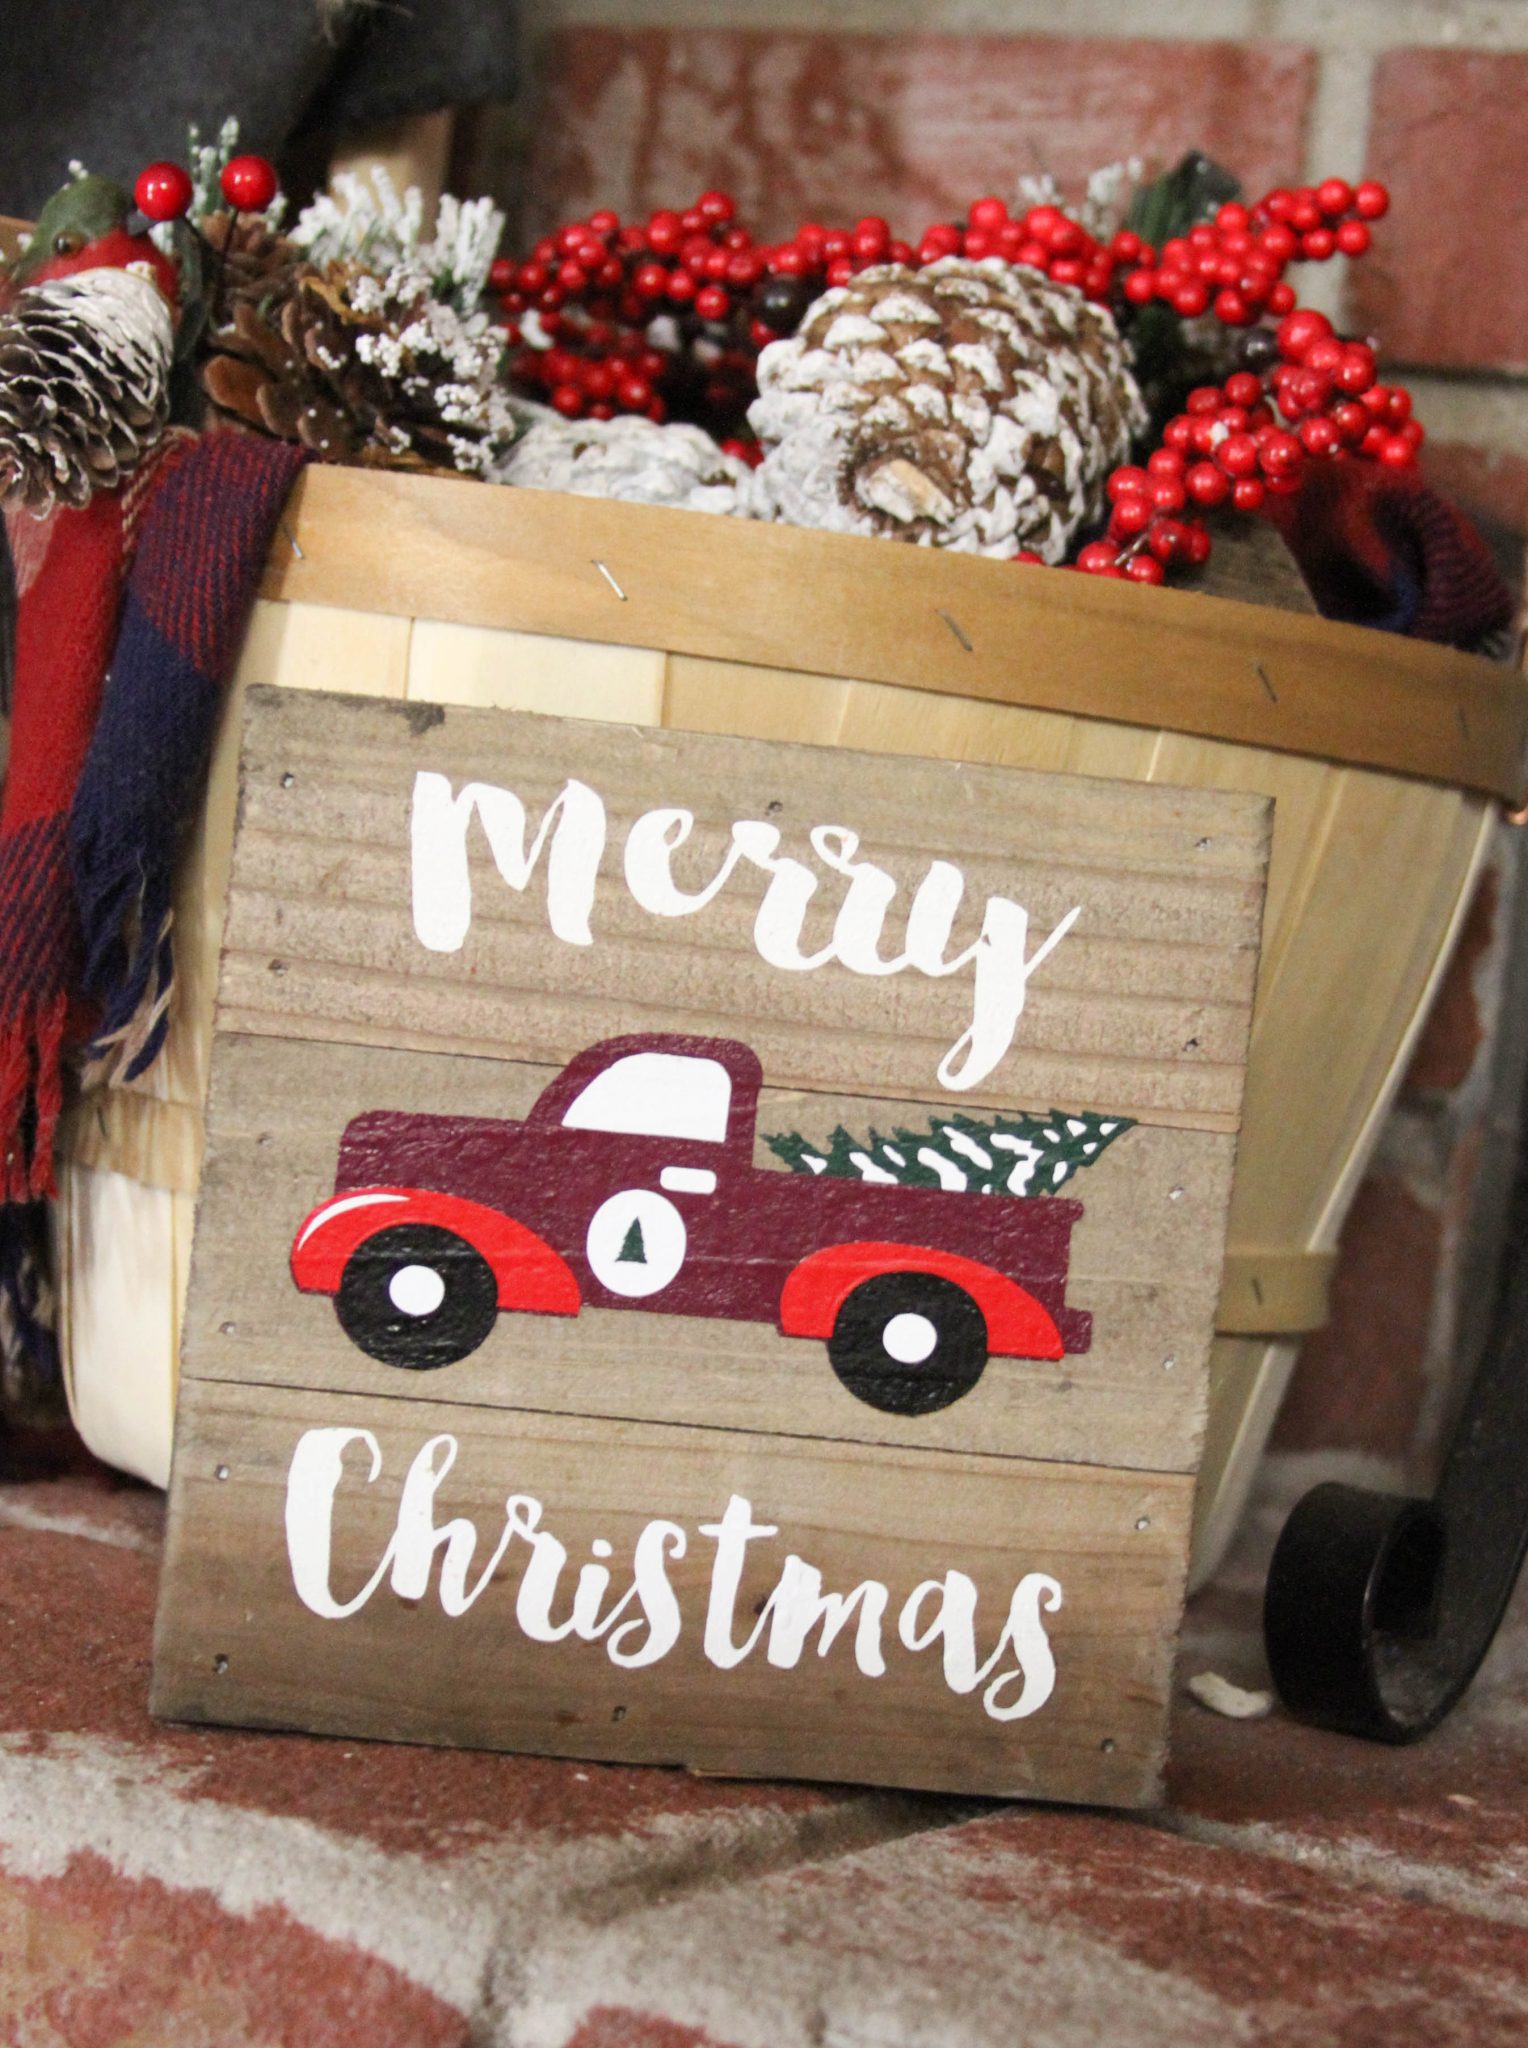 merry christmas sign with a red truck